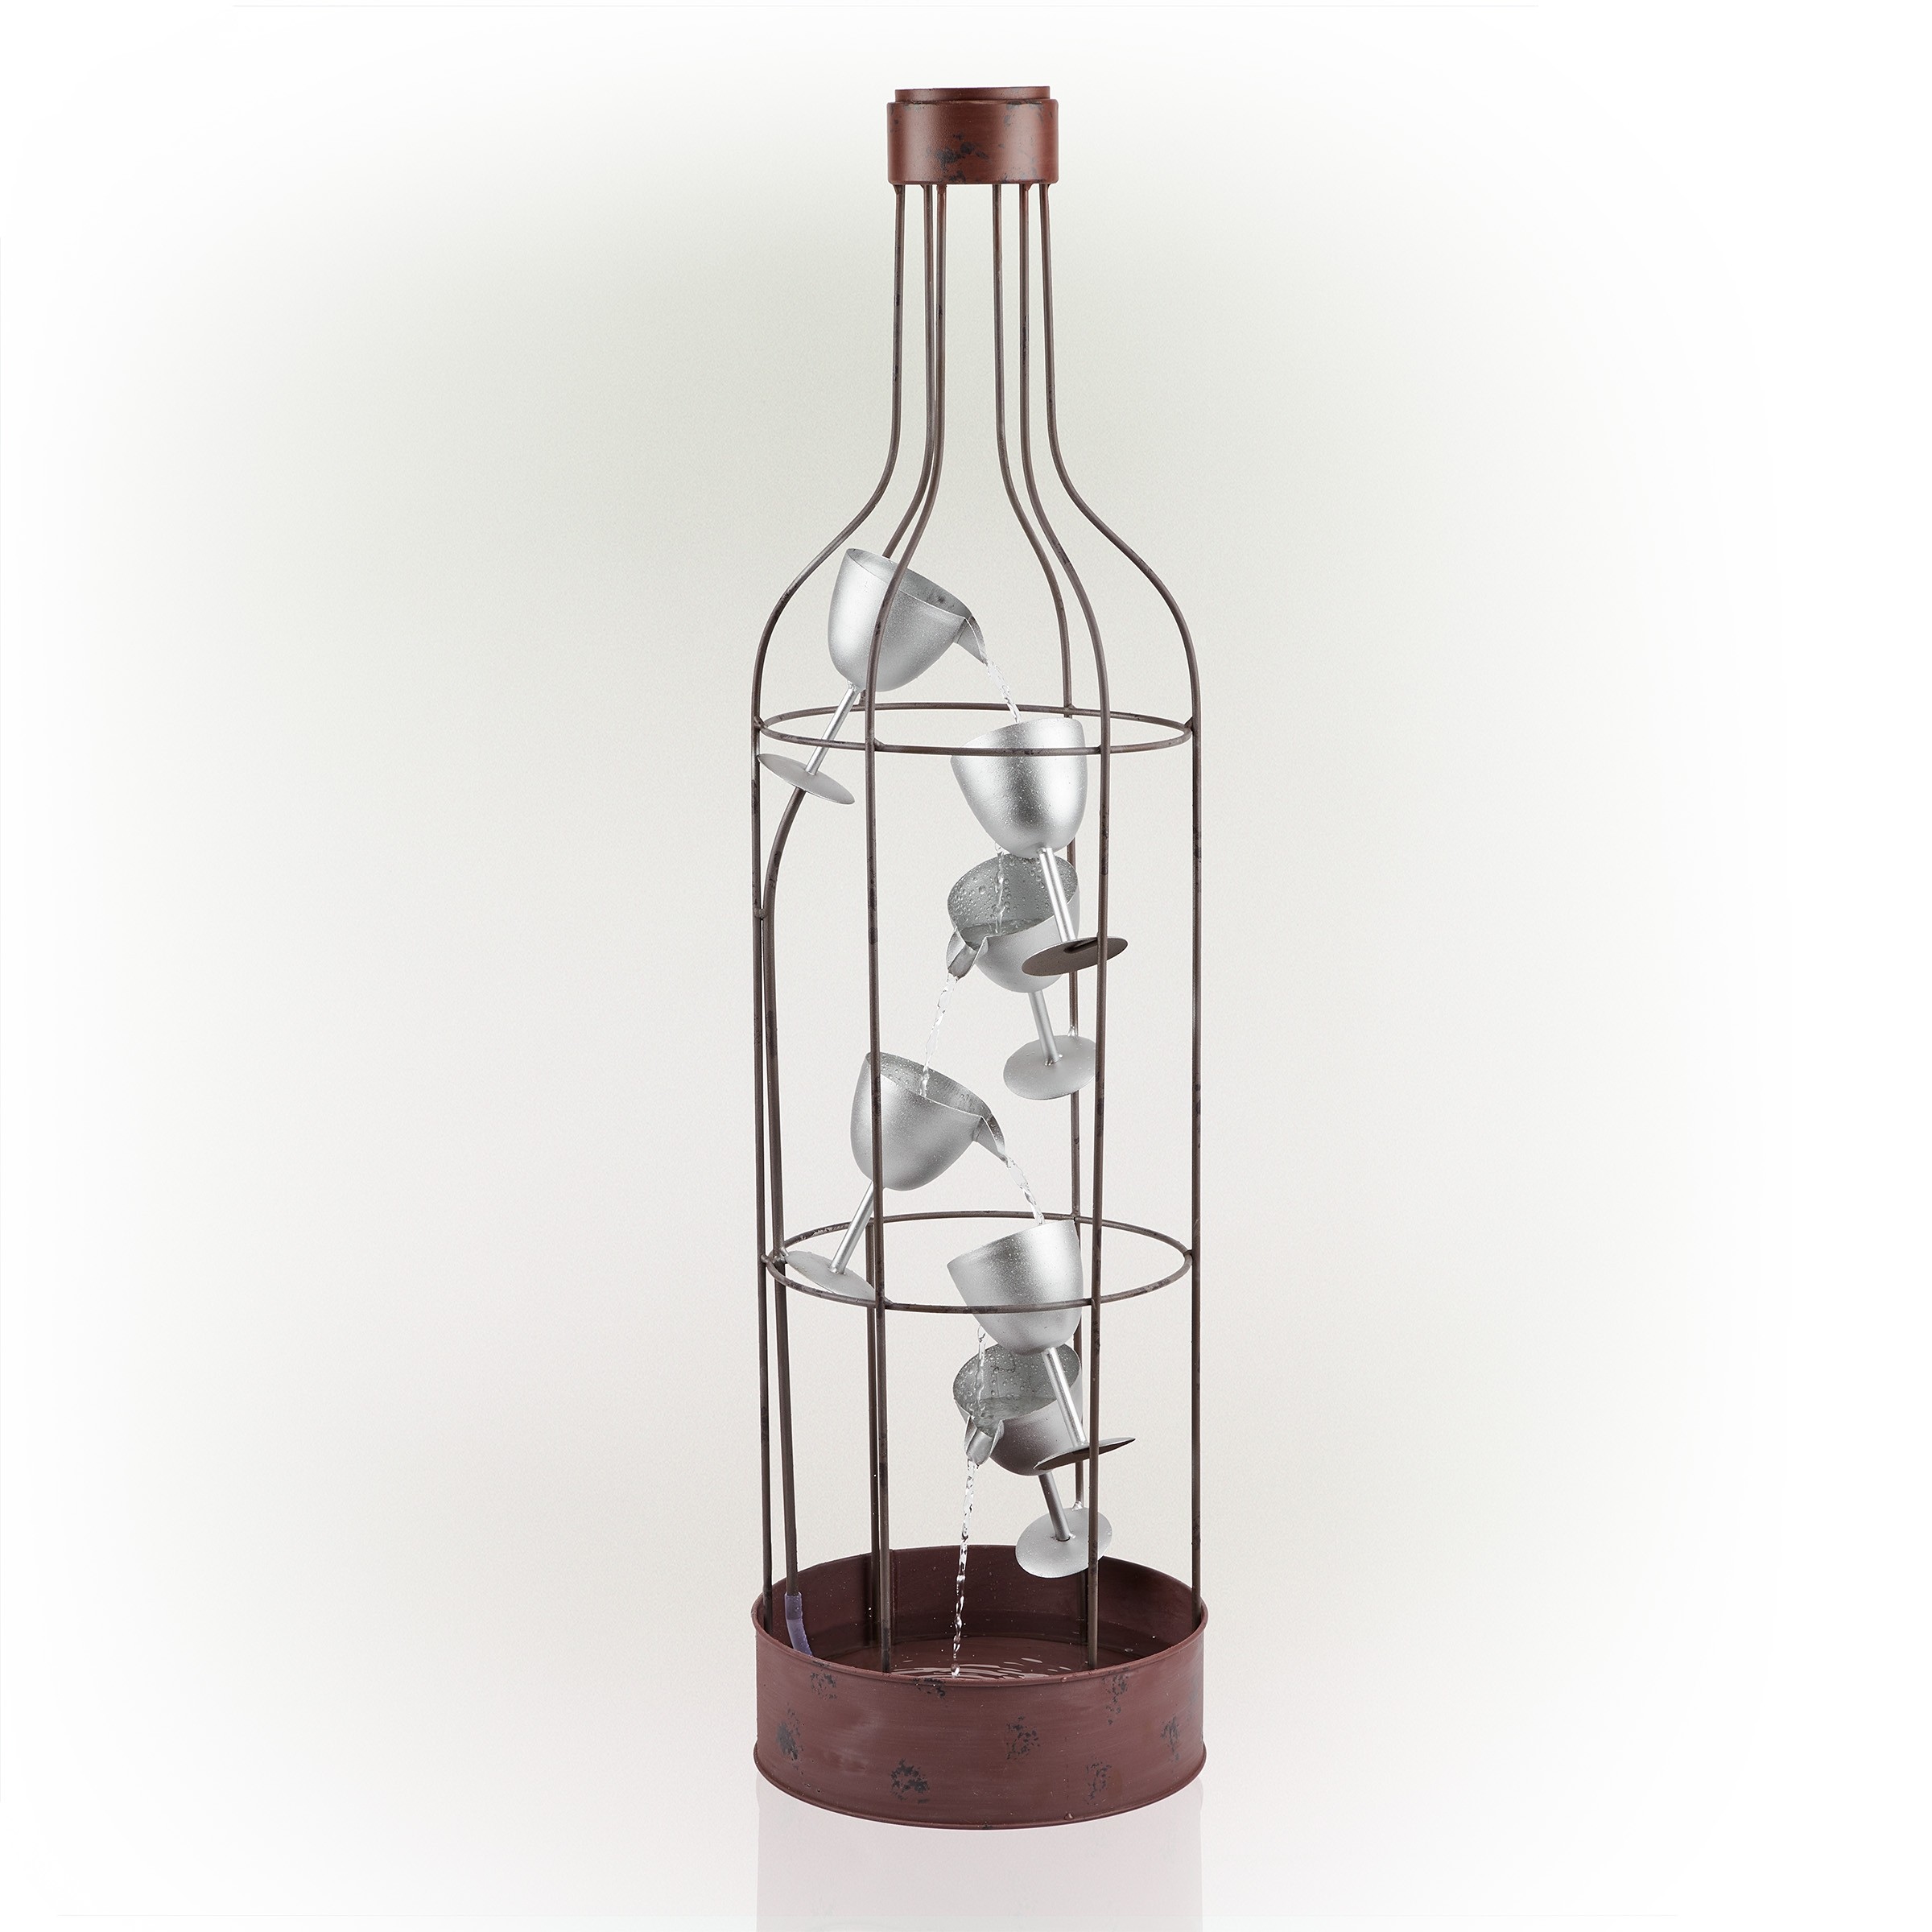 44" BOTTLE SHAPED FOUNTAIN WITH TIERING WINE GLASSES